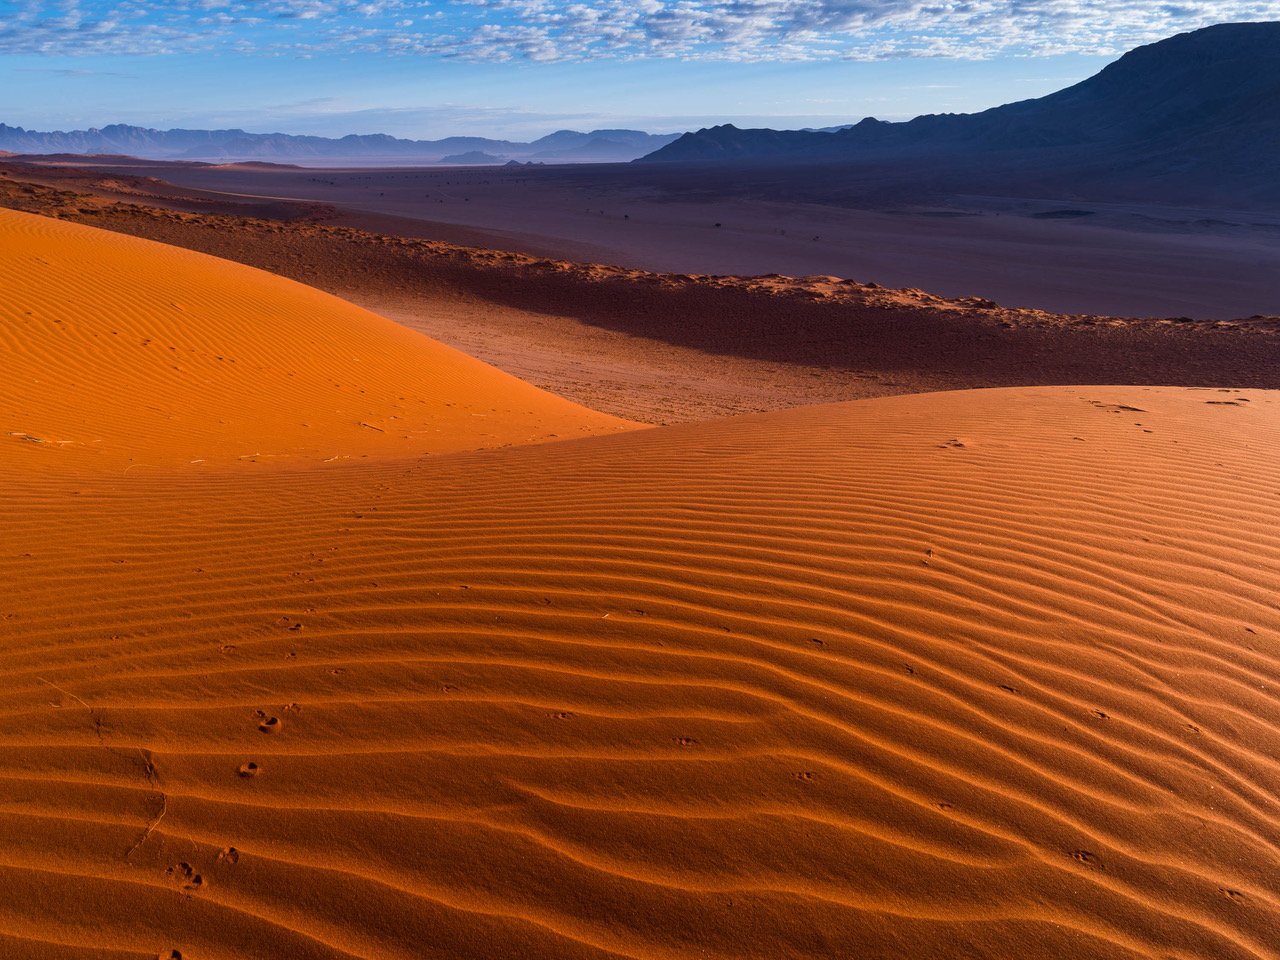 Curvy sand of a desert, with large mountains beside, Namibia #25, Africa